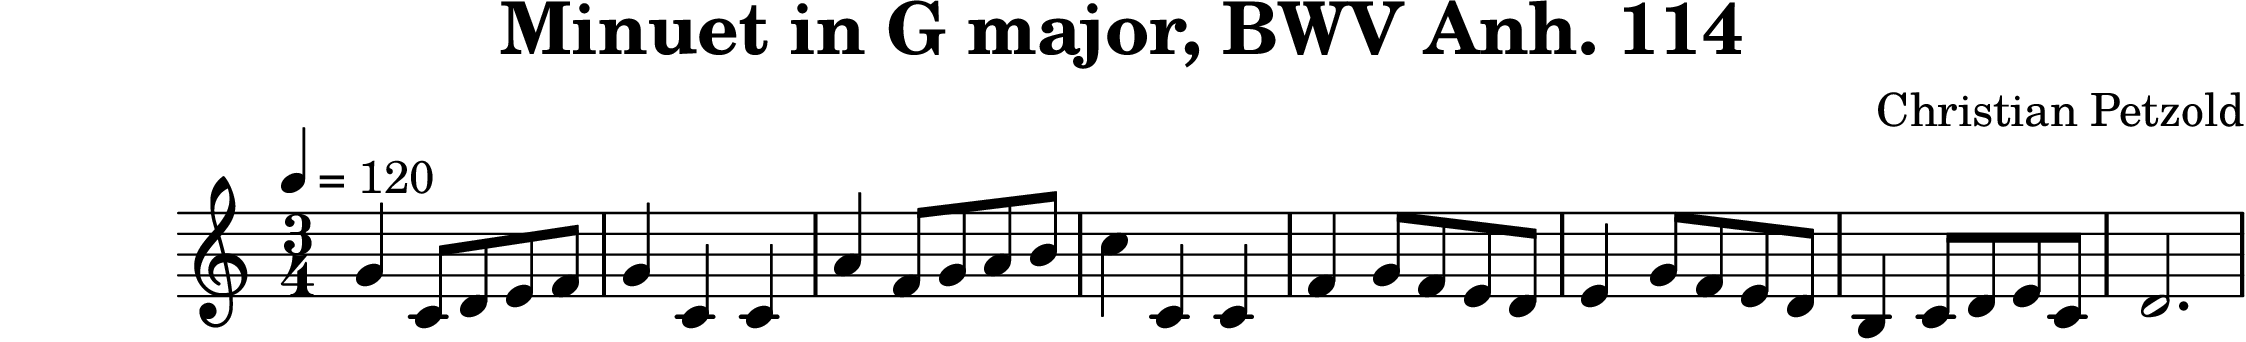 \version "2.20.0"
\header {
  title = "Minuet in G major, BWV Anh. 114"
  composer = "Christian Petzold"
}

\score {
    <<
    \relative c'' {
      \time 3/4
      \tempo 4 = 120
      \key g \major

      d4 g,8 a b c
      d4 g, g
      e'4 c8 d e fis
      g4 g, g

      c4 d8 c b a
      b4 d8 c b a
      fis4 g8 a b g
      a2.
    }
    >>

    \midi {}
    \layout {}
}